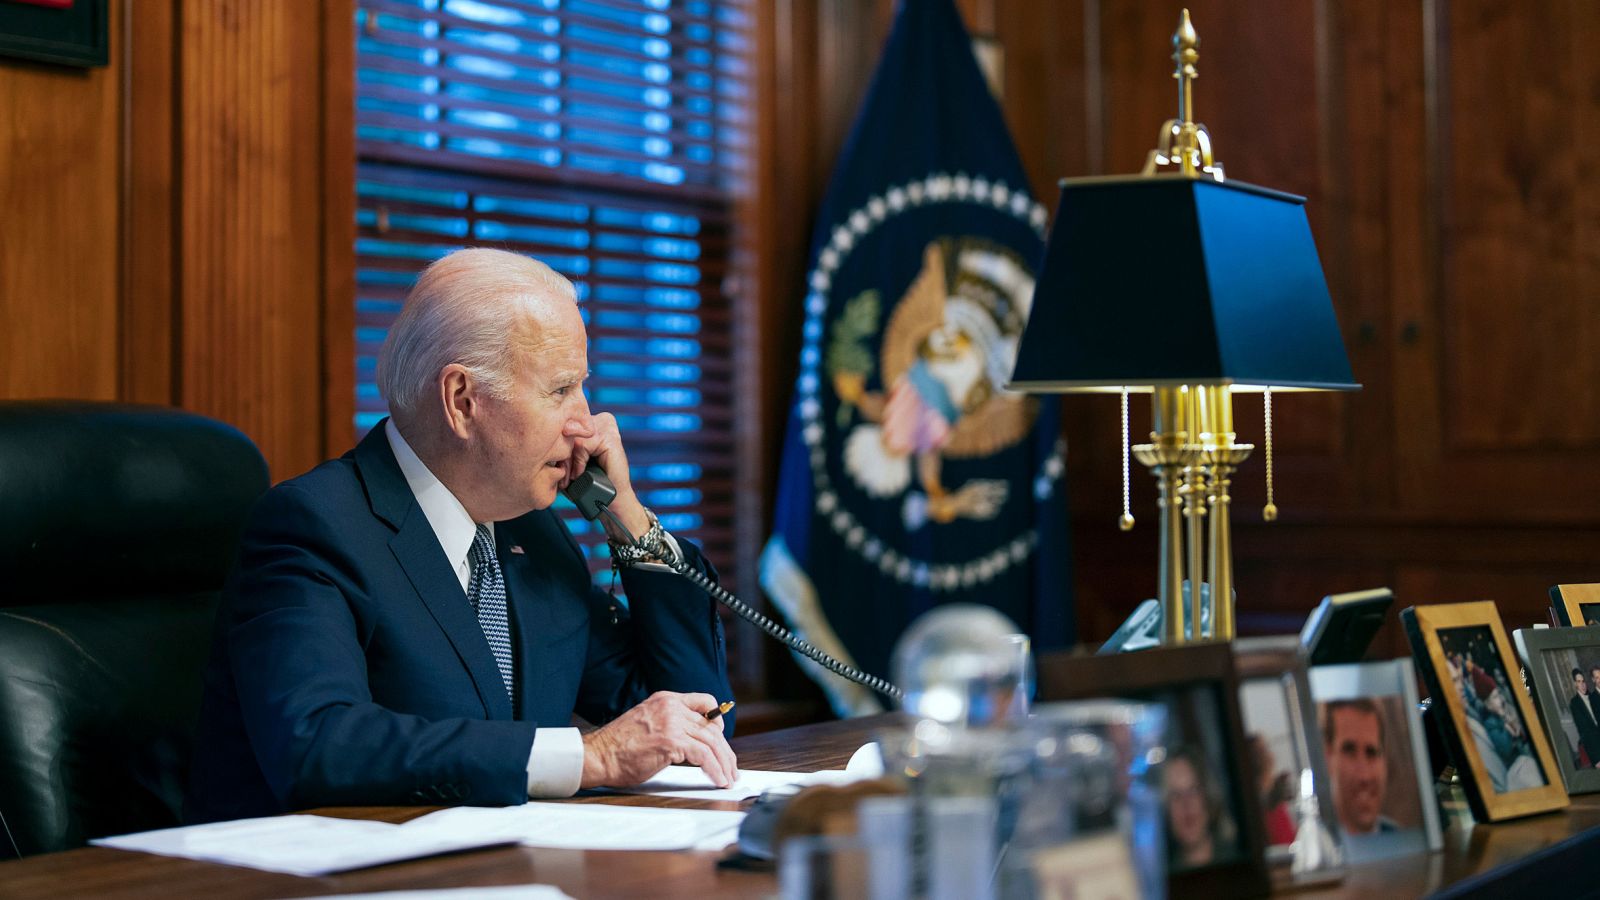 Five more pages of classified material were found at Biden’s Wilmington home